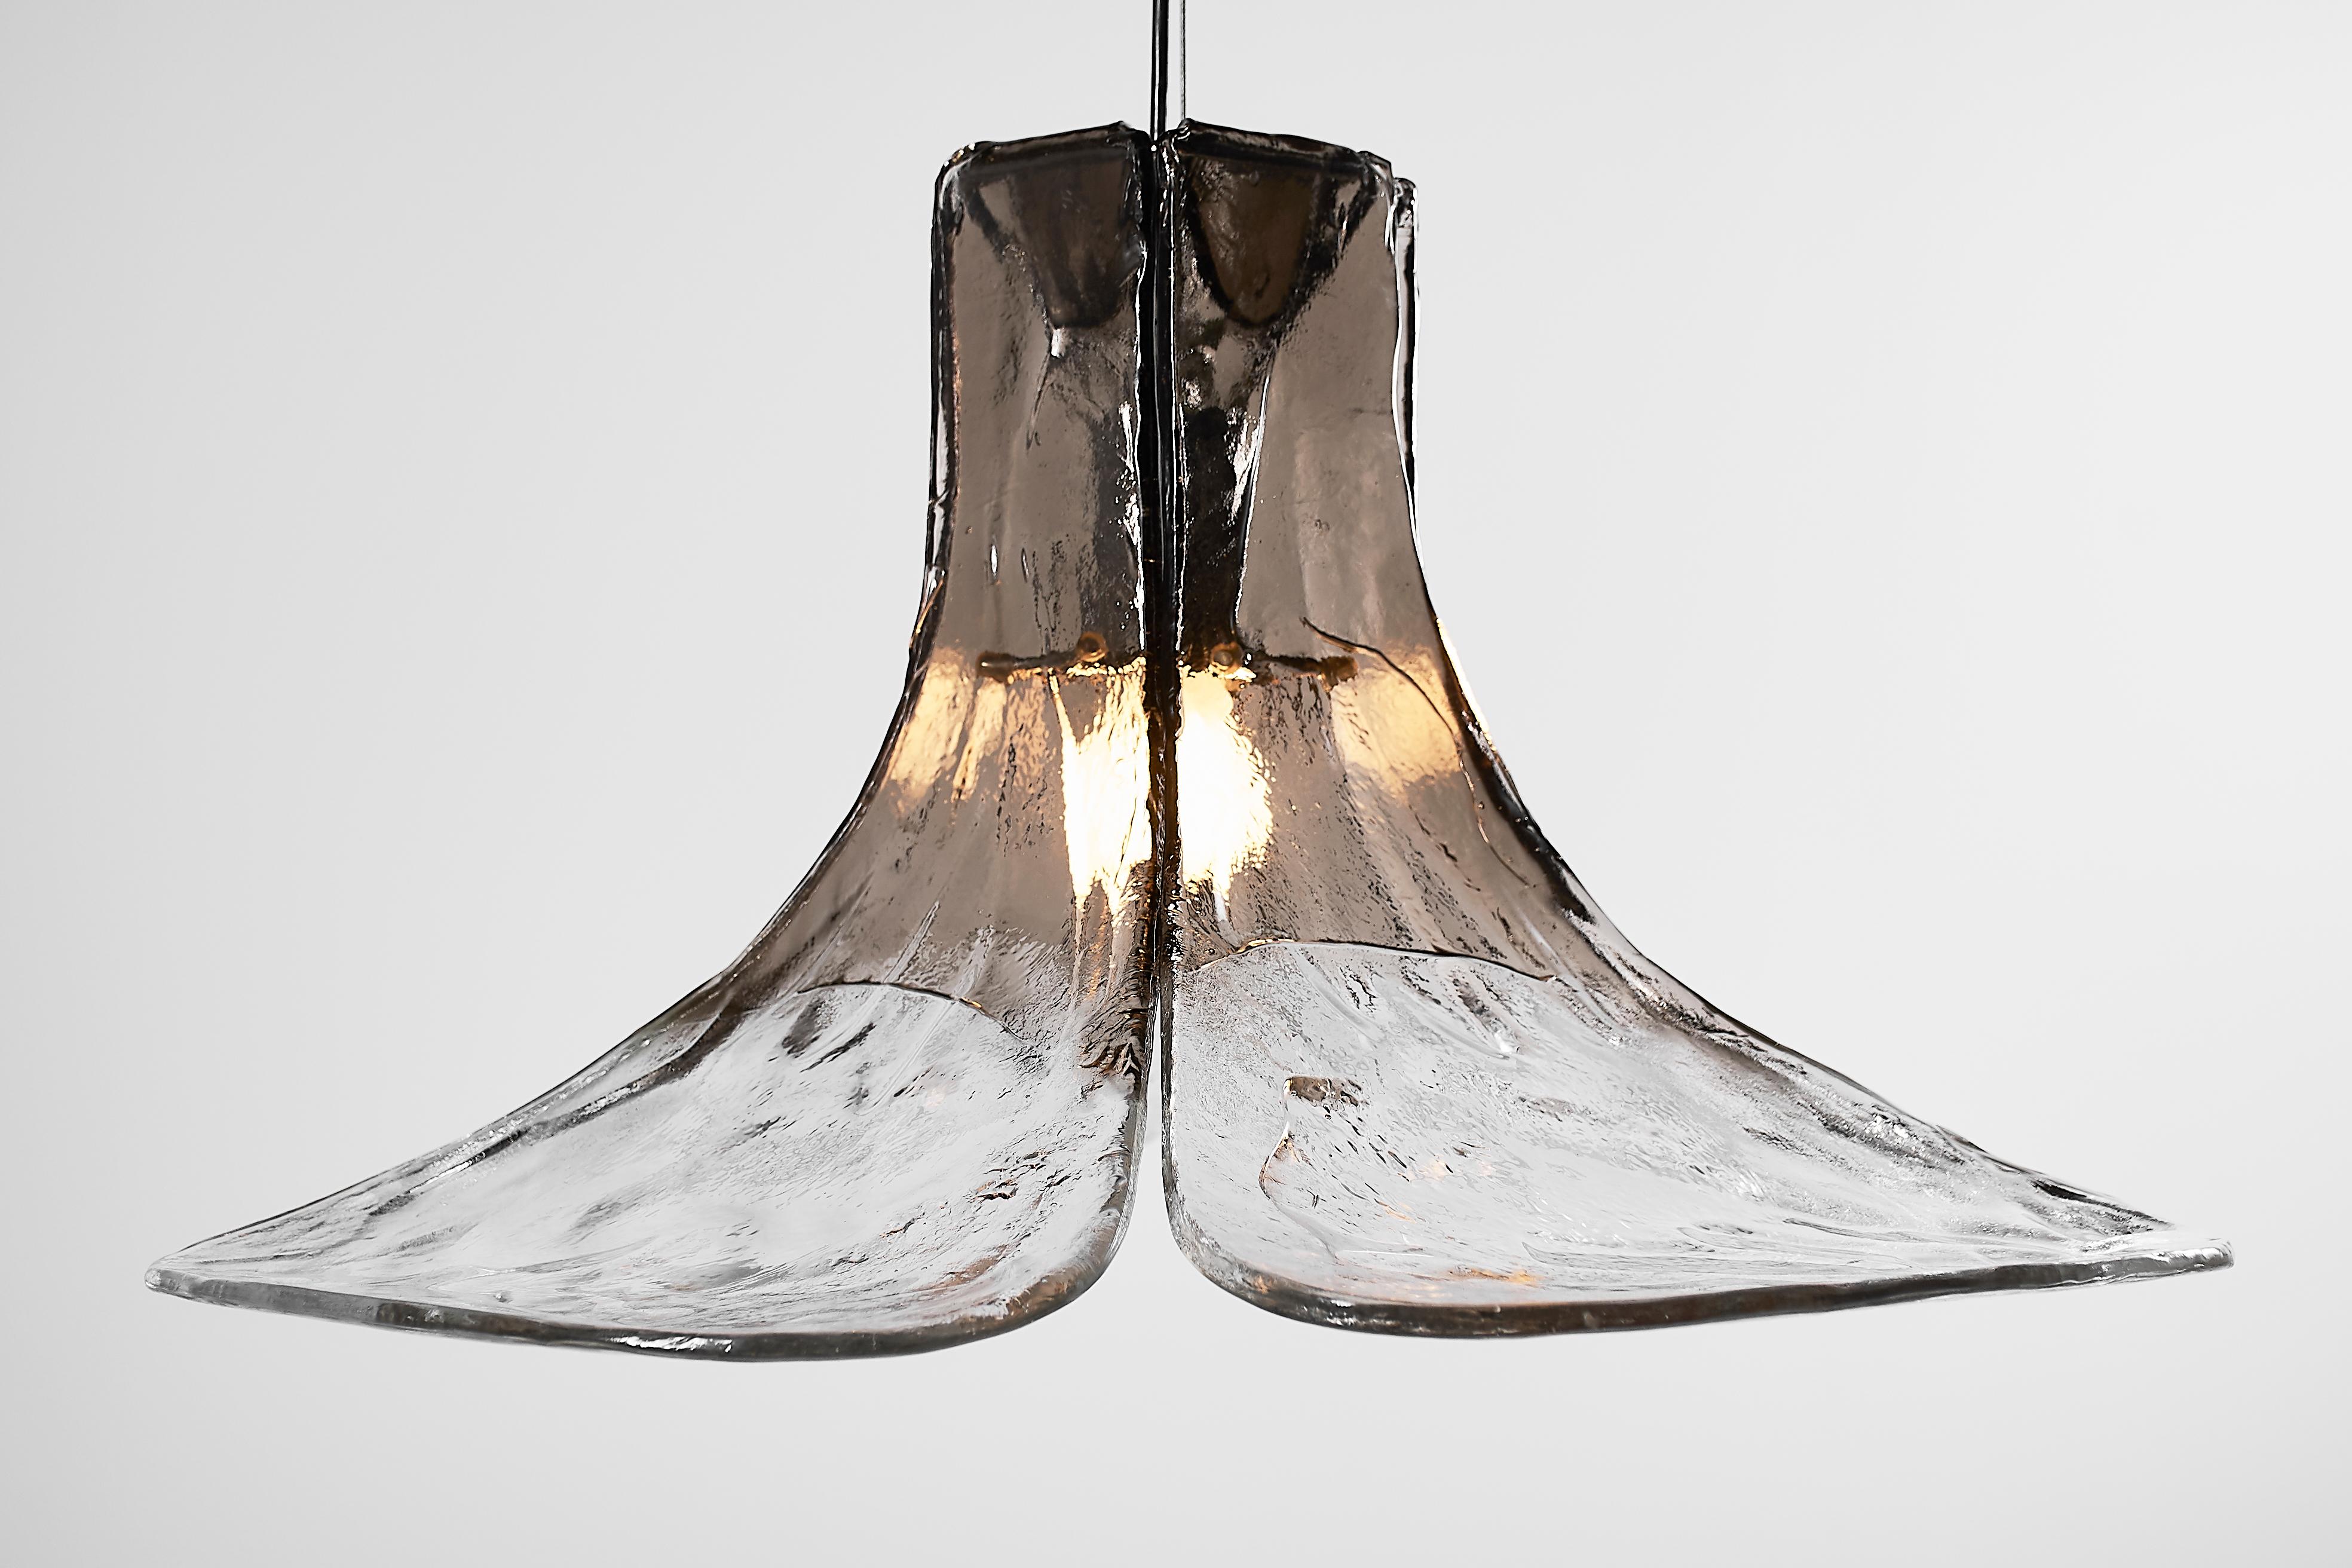 Extra large 1970s Italian Mid-Century Organic Modern floral pendant light. Four large and very thick hand blown clear and smoked Murano glass petals are supported by a metal frame. The petals droop in a concave fashion from the canopy down. They